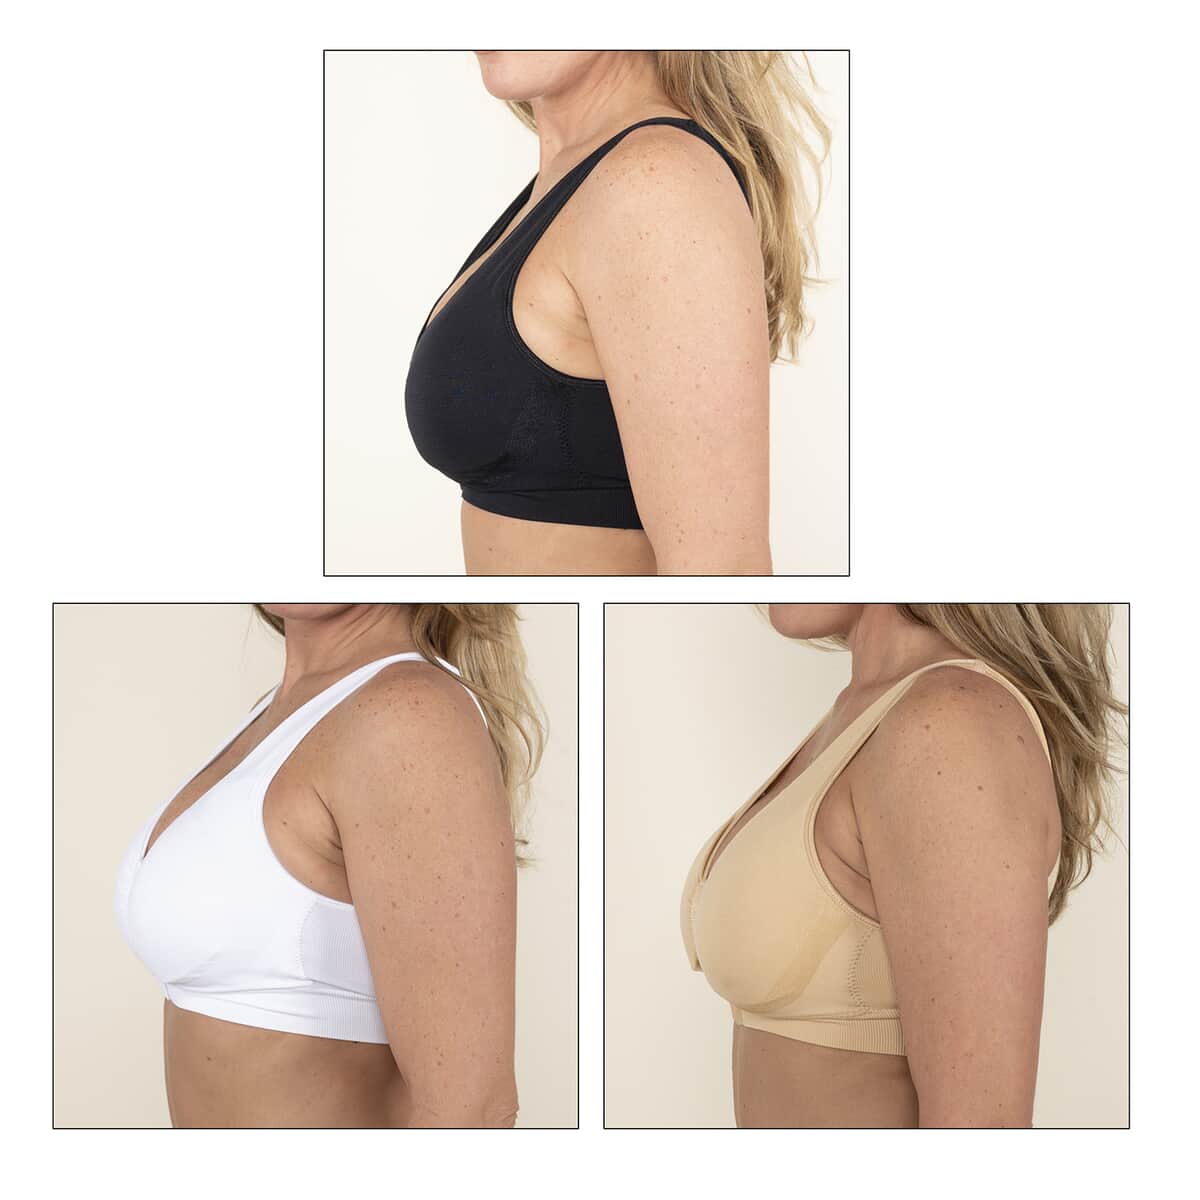 Buy Miracle Bamboo Beyond Comfort Bra Set of 3 Front Closure Bras - Black,  Beige and White - Size 2XL at ShopLC.